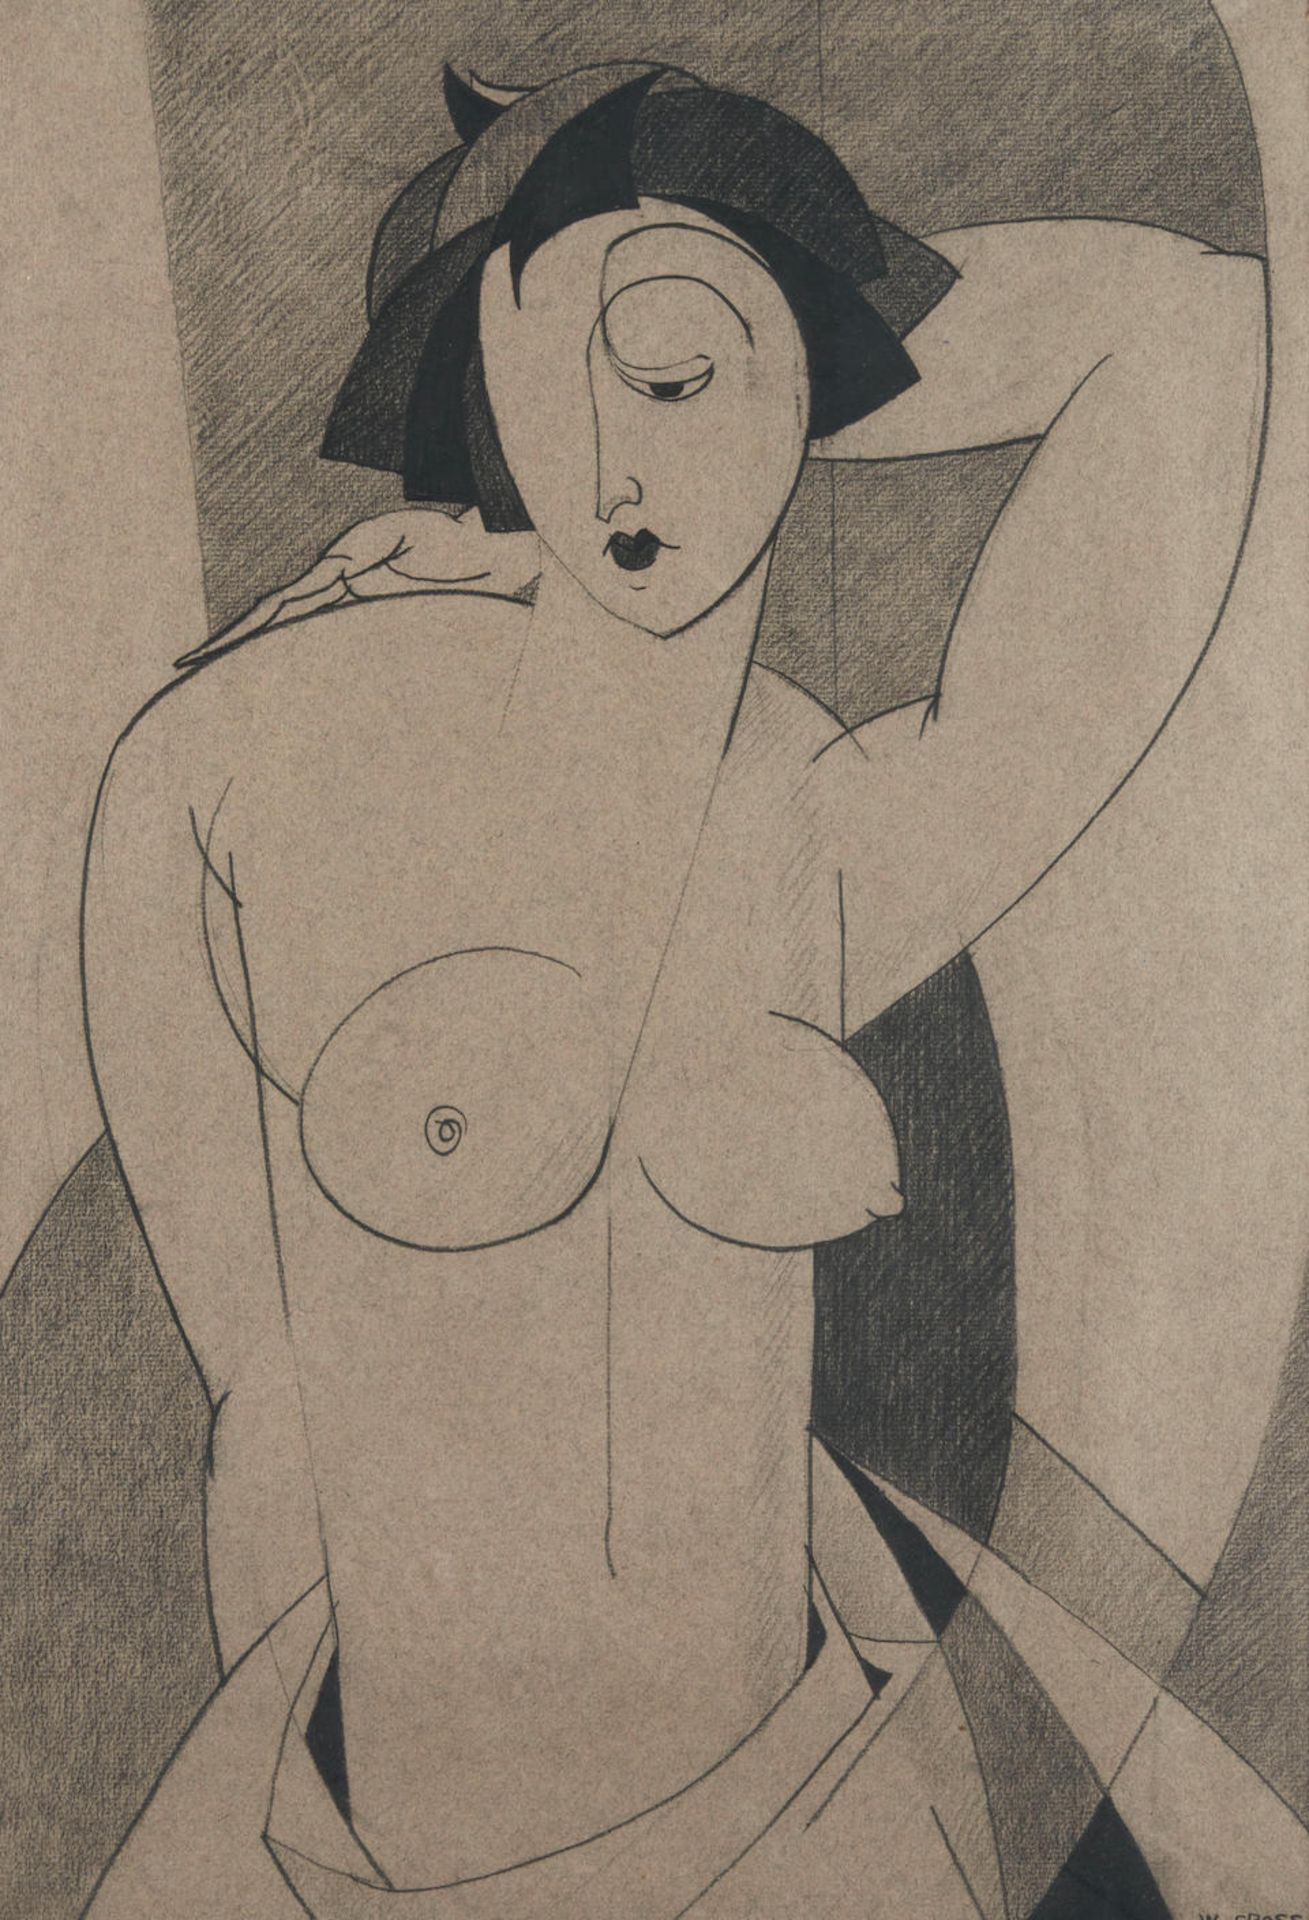 CUBIST SCHOOL DRAWING DEPICTING A NUDE WOMAN, probably United States, c. 1930, charcoal on paper...